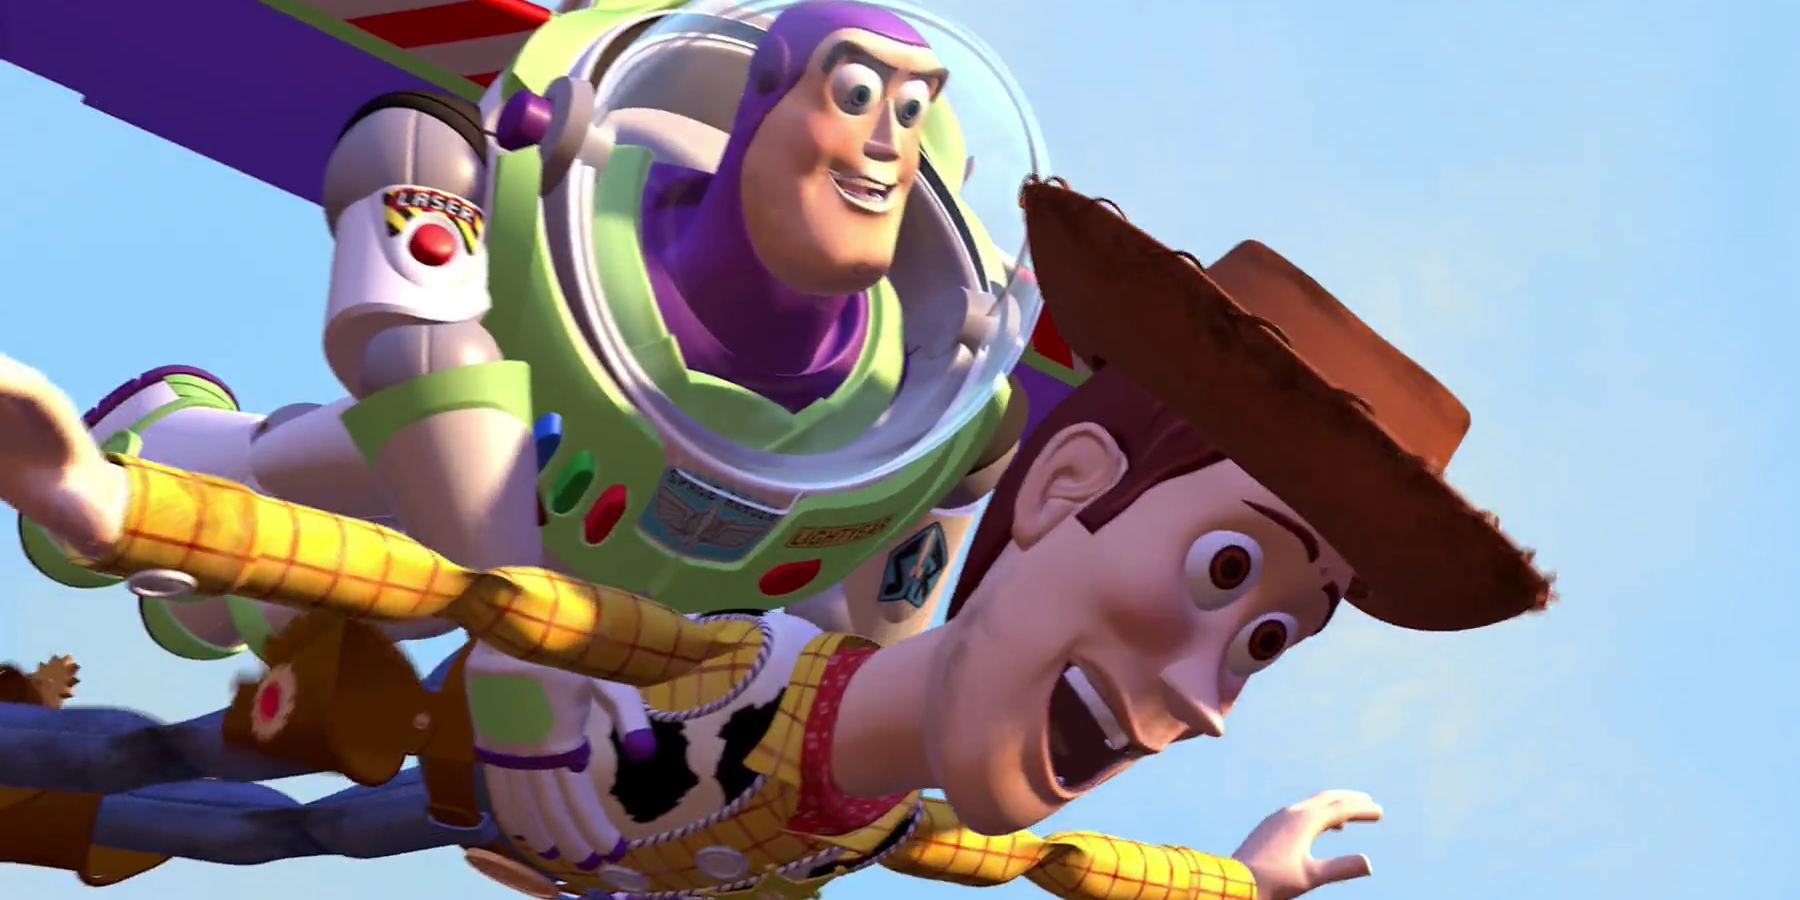 Buzz carries Woody while flying in Toy Story